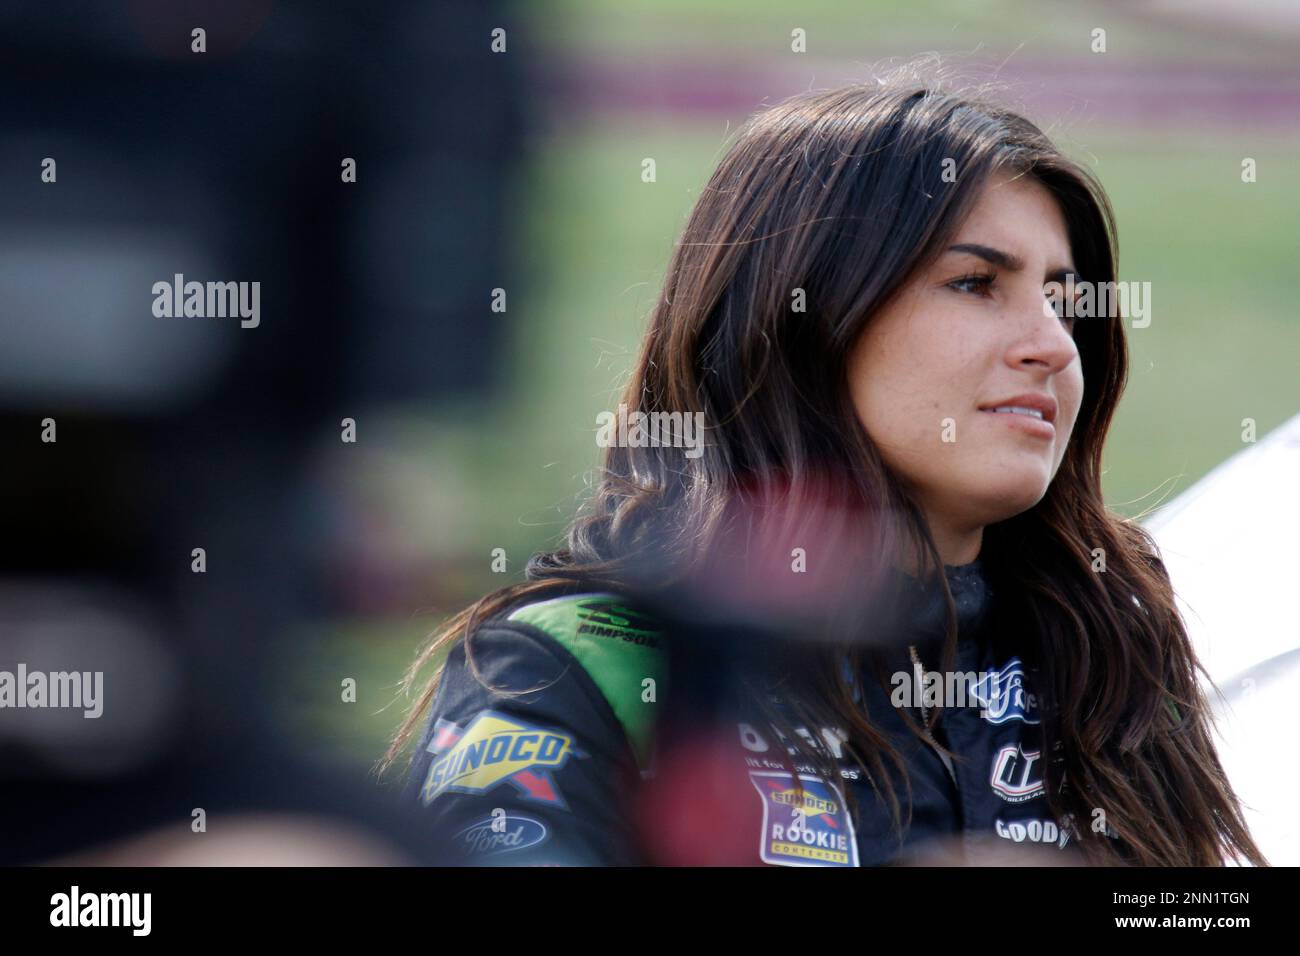 Hailie Deegan Unveils No. 1 Monster Energy Ford F-150 for 2021